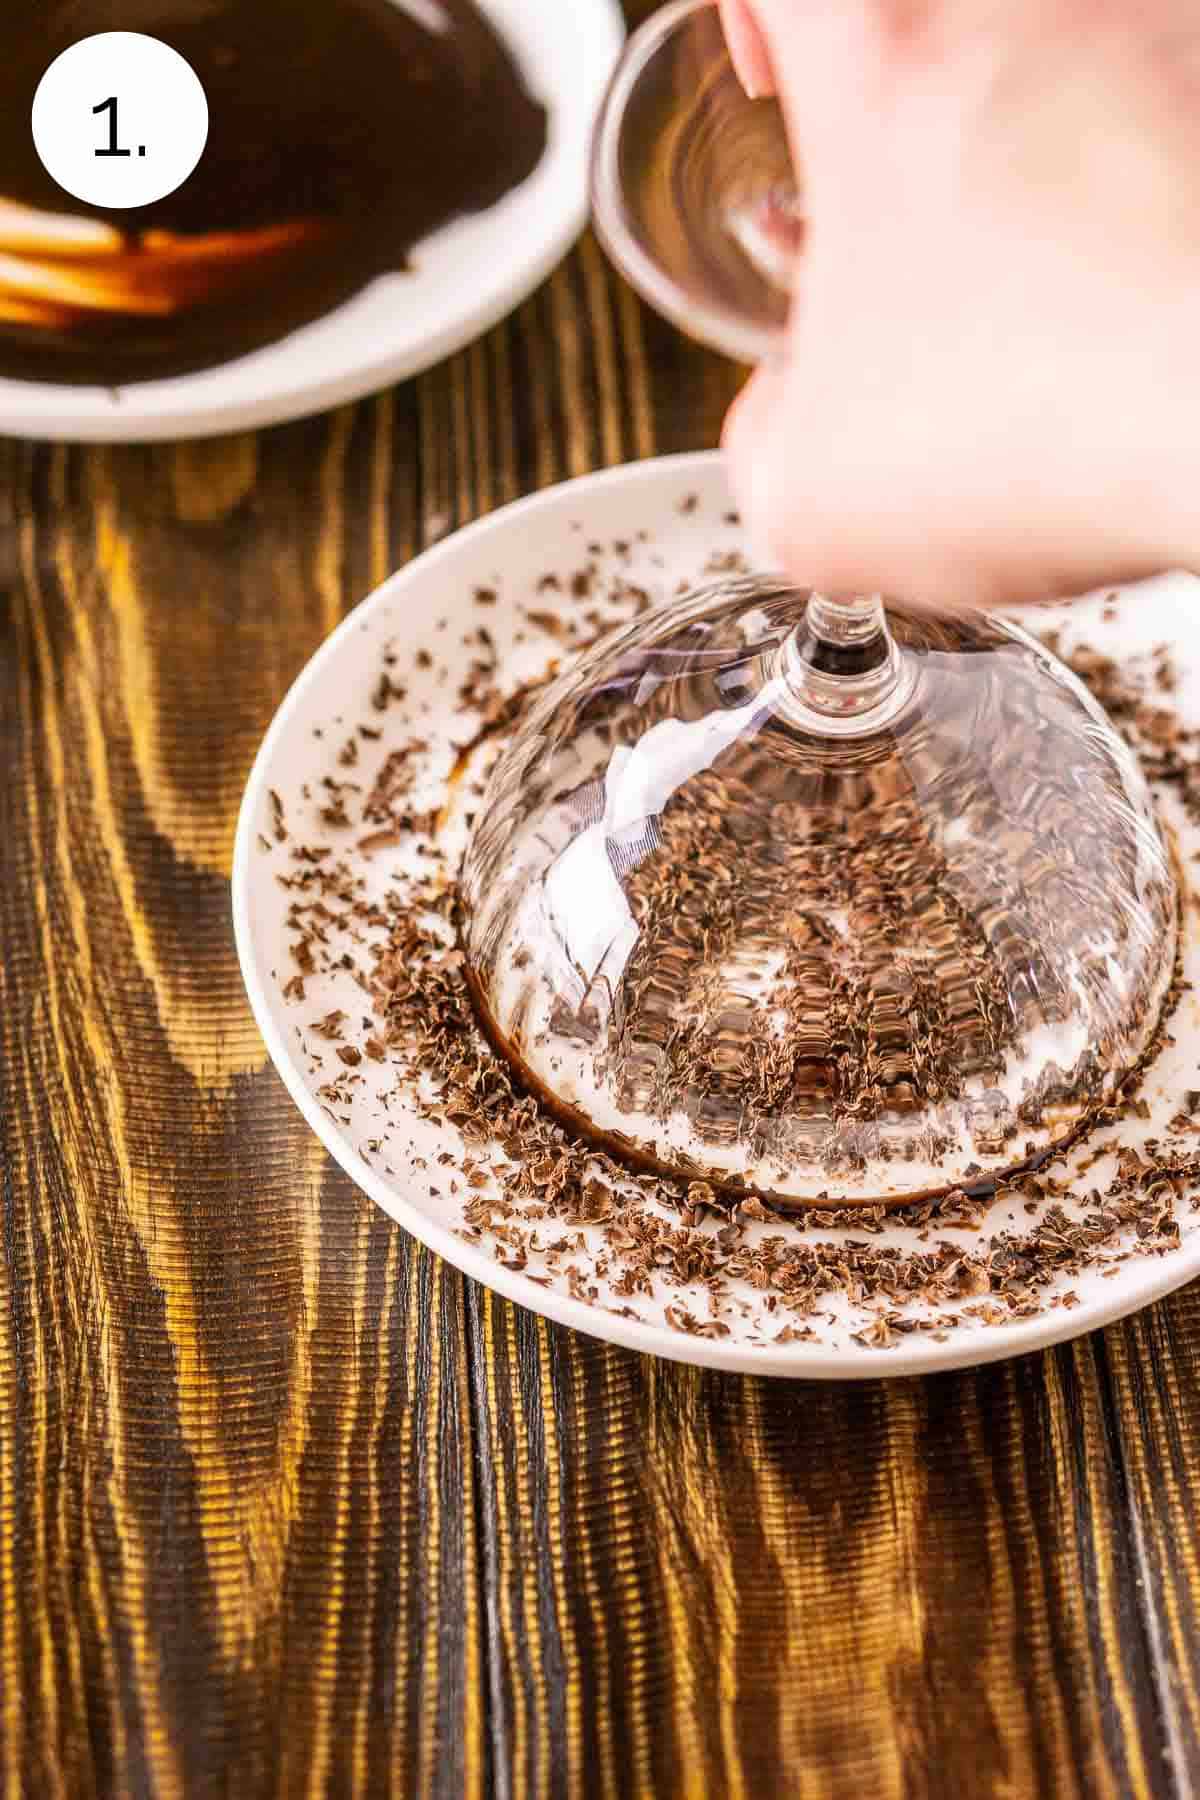 A hand dipping a martini glass covered in chocolate sauce onto a small plate with grated chocolate to garnish.